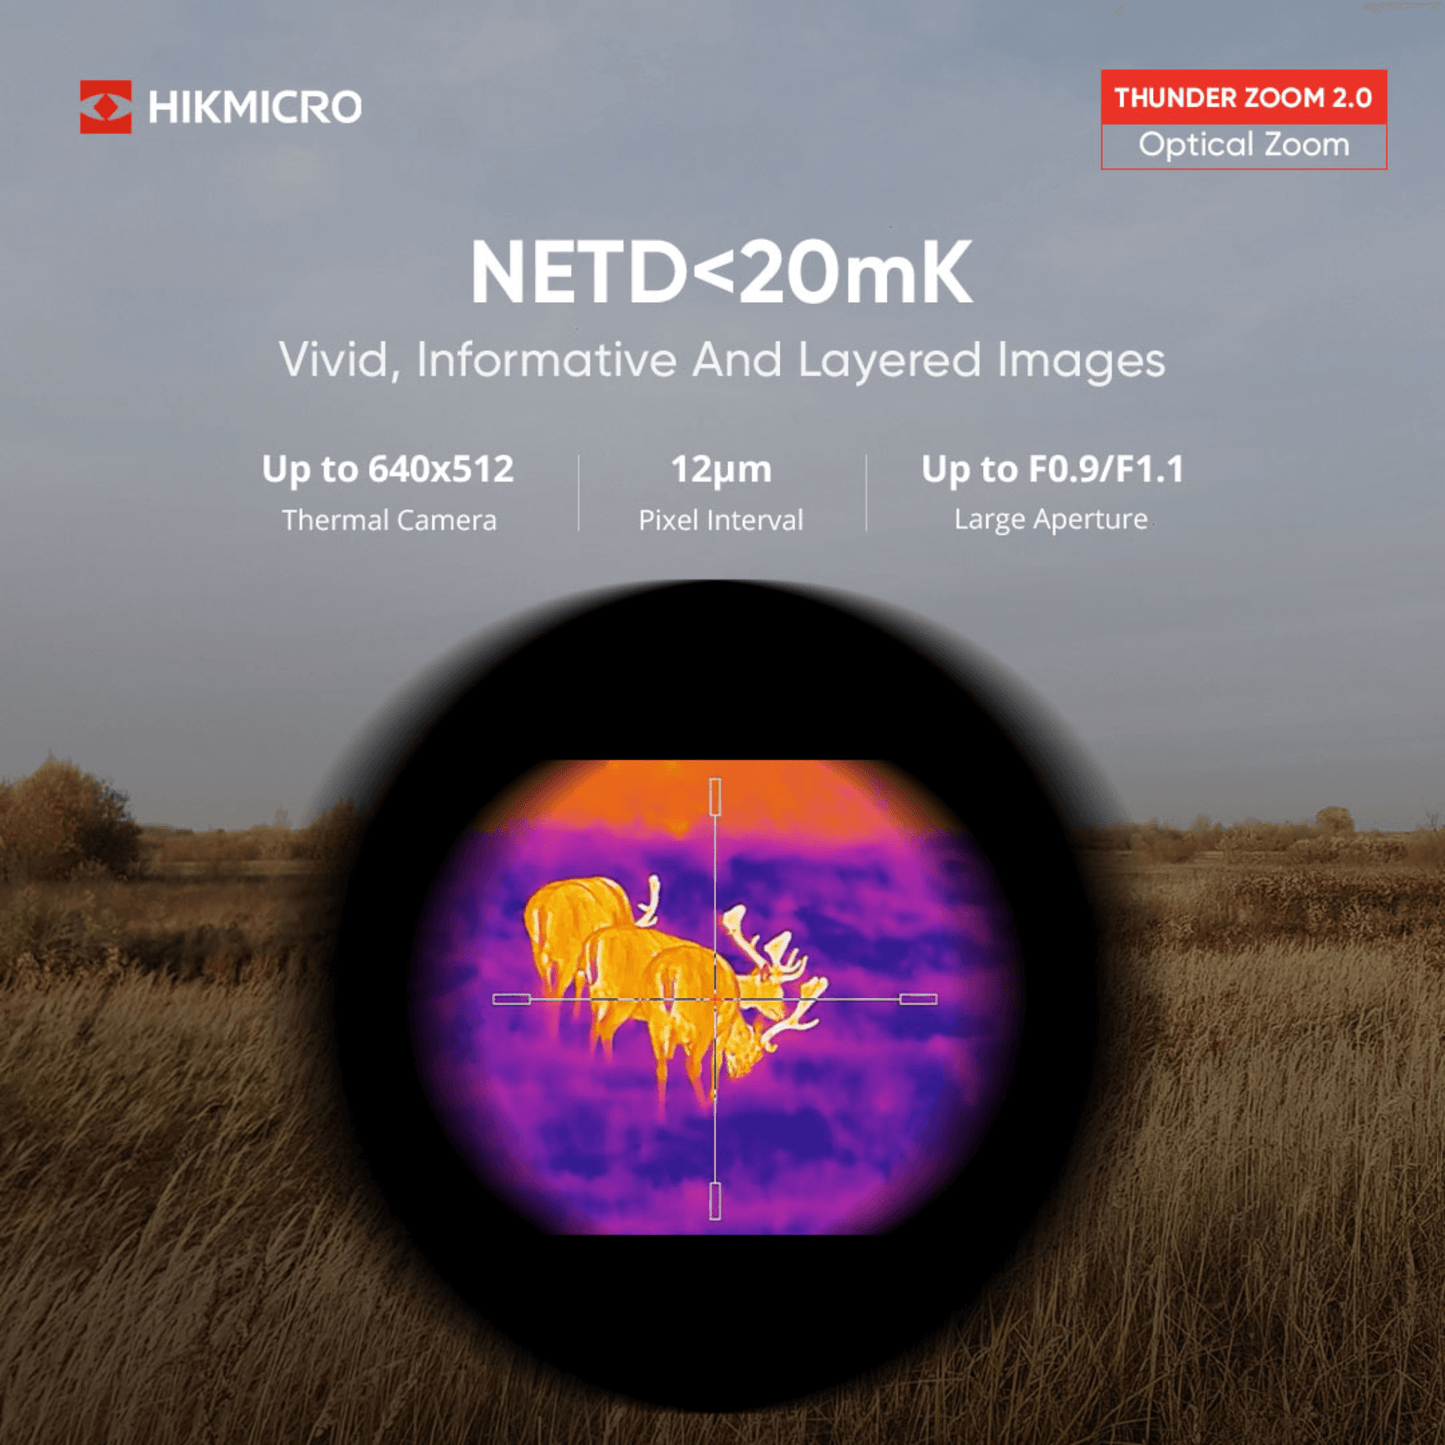 HikMicro Thunder Zoom TH50Z 2.0 20mK NETD allows for vivid images